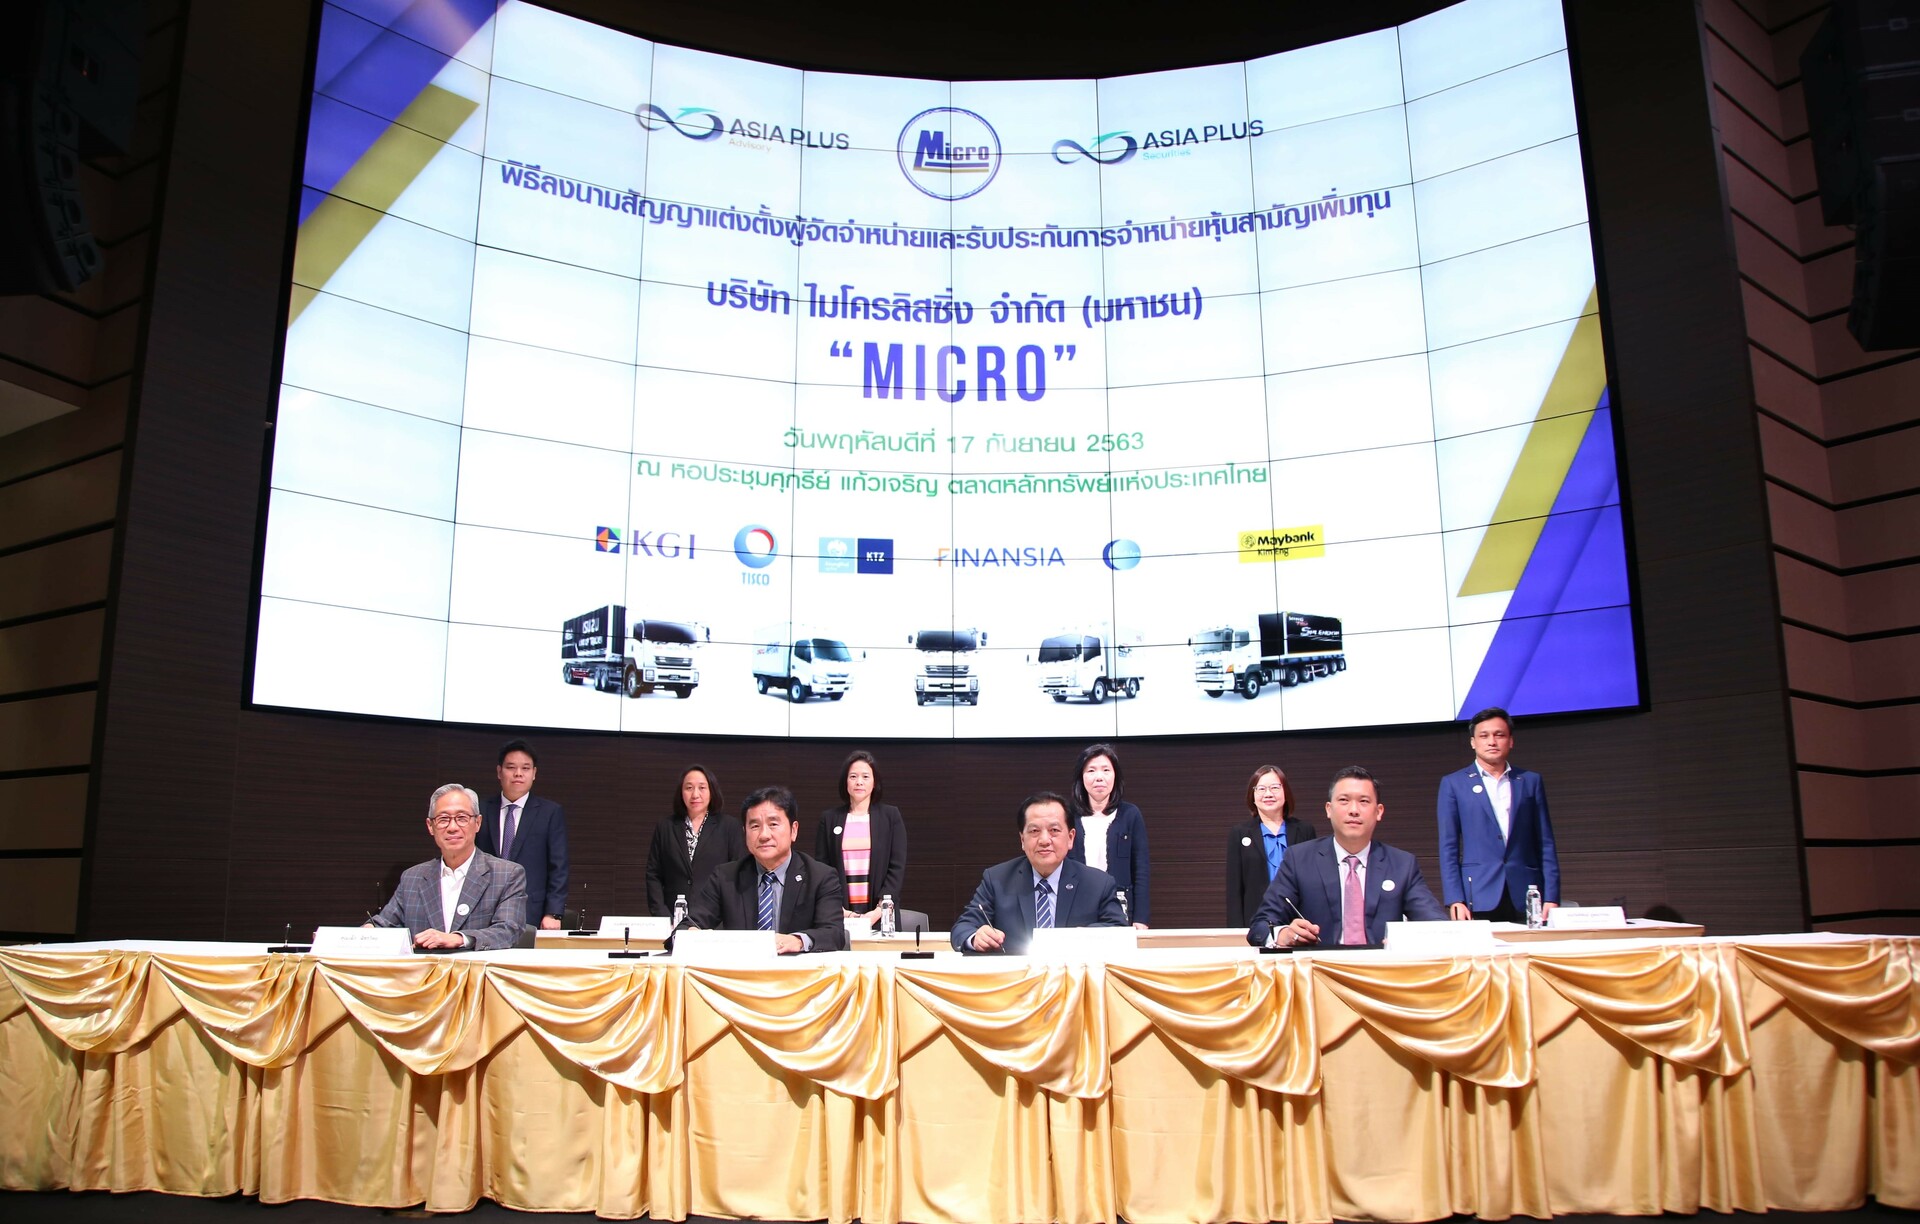 "MICRO" Underwriting Agreement Signing Ceremony